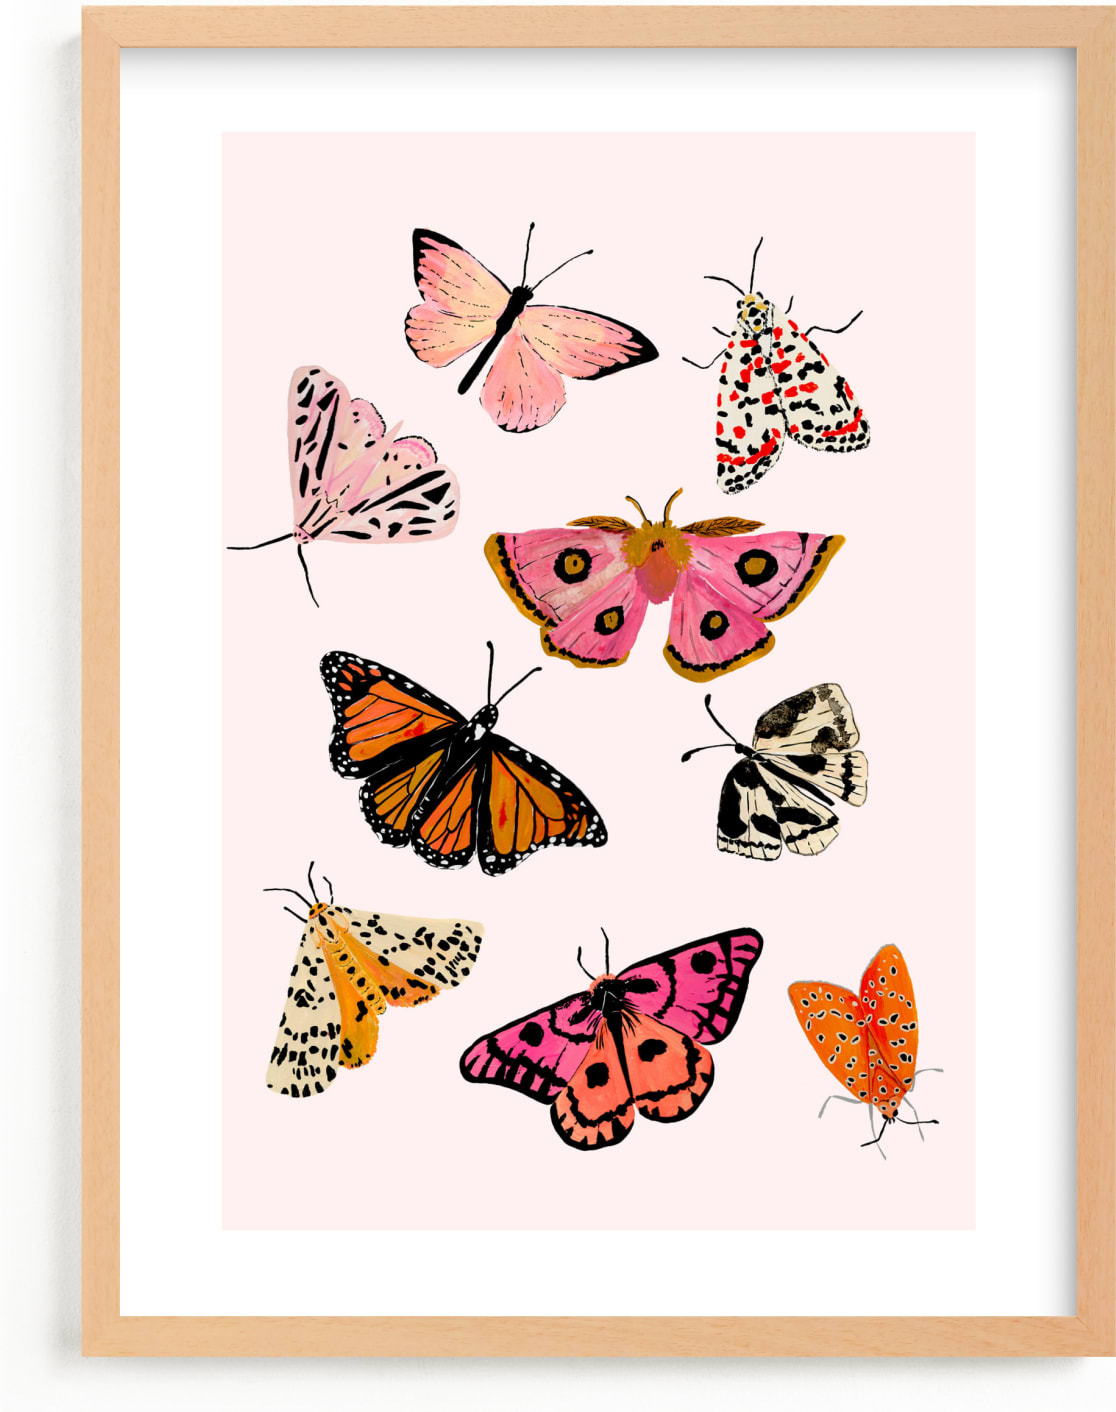 This is a pink nursery wall art by Shannon Kirsten called Moths & Butterflies.